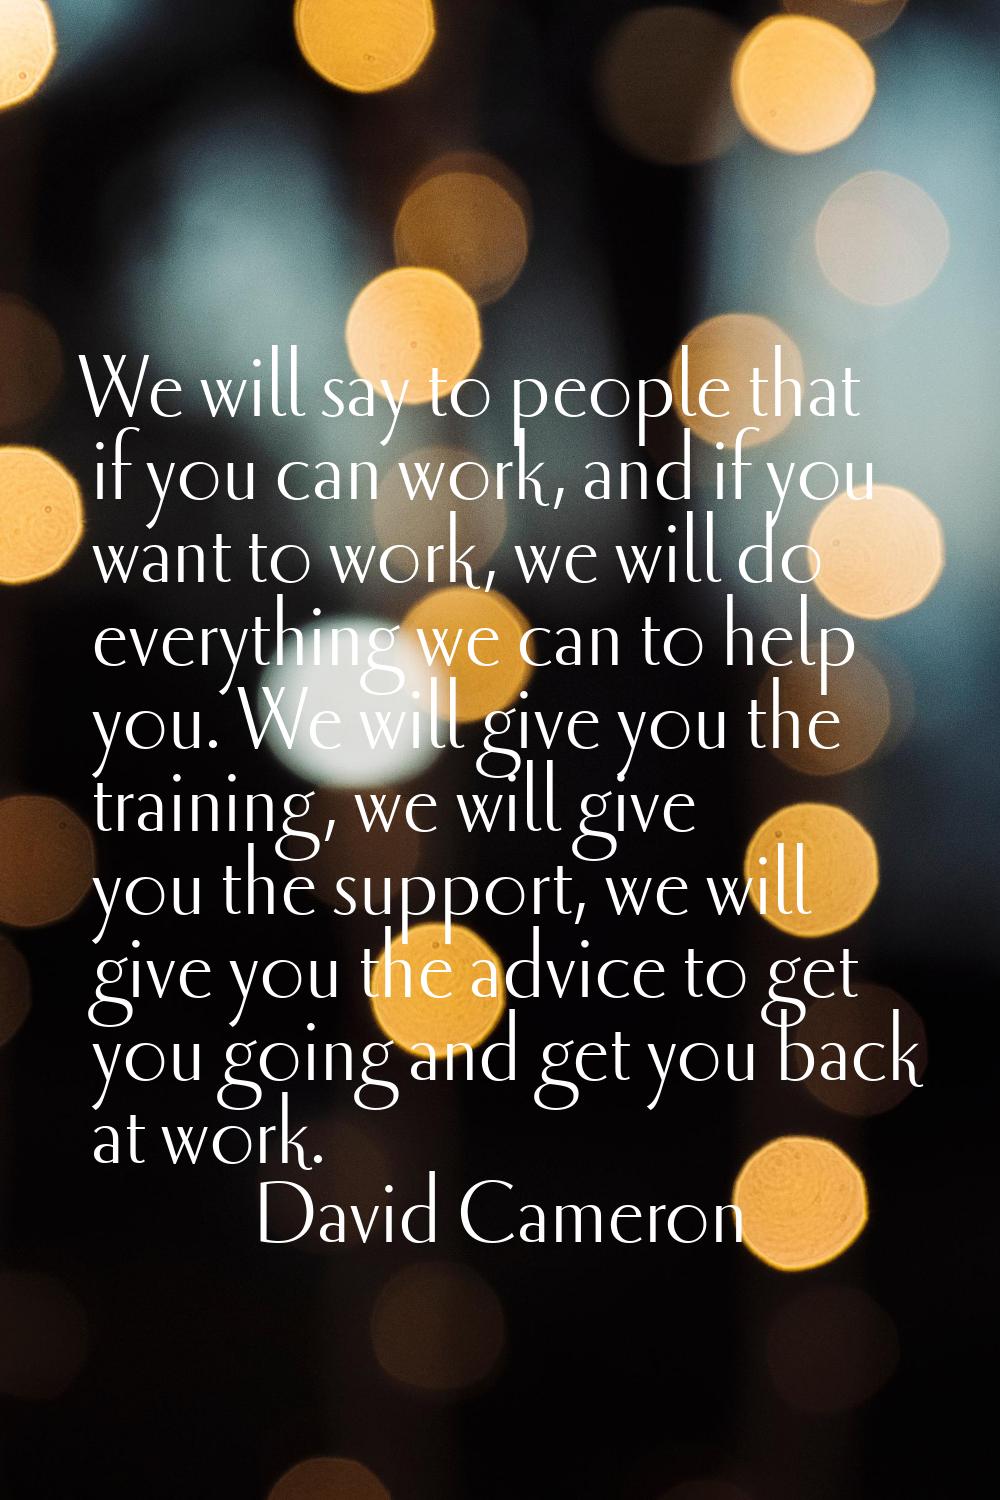 We will say to people that if you can work, and if you want to work, we will do everything we can t